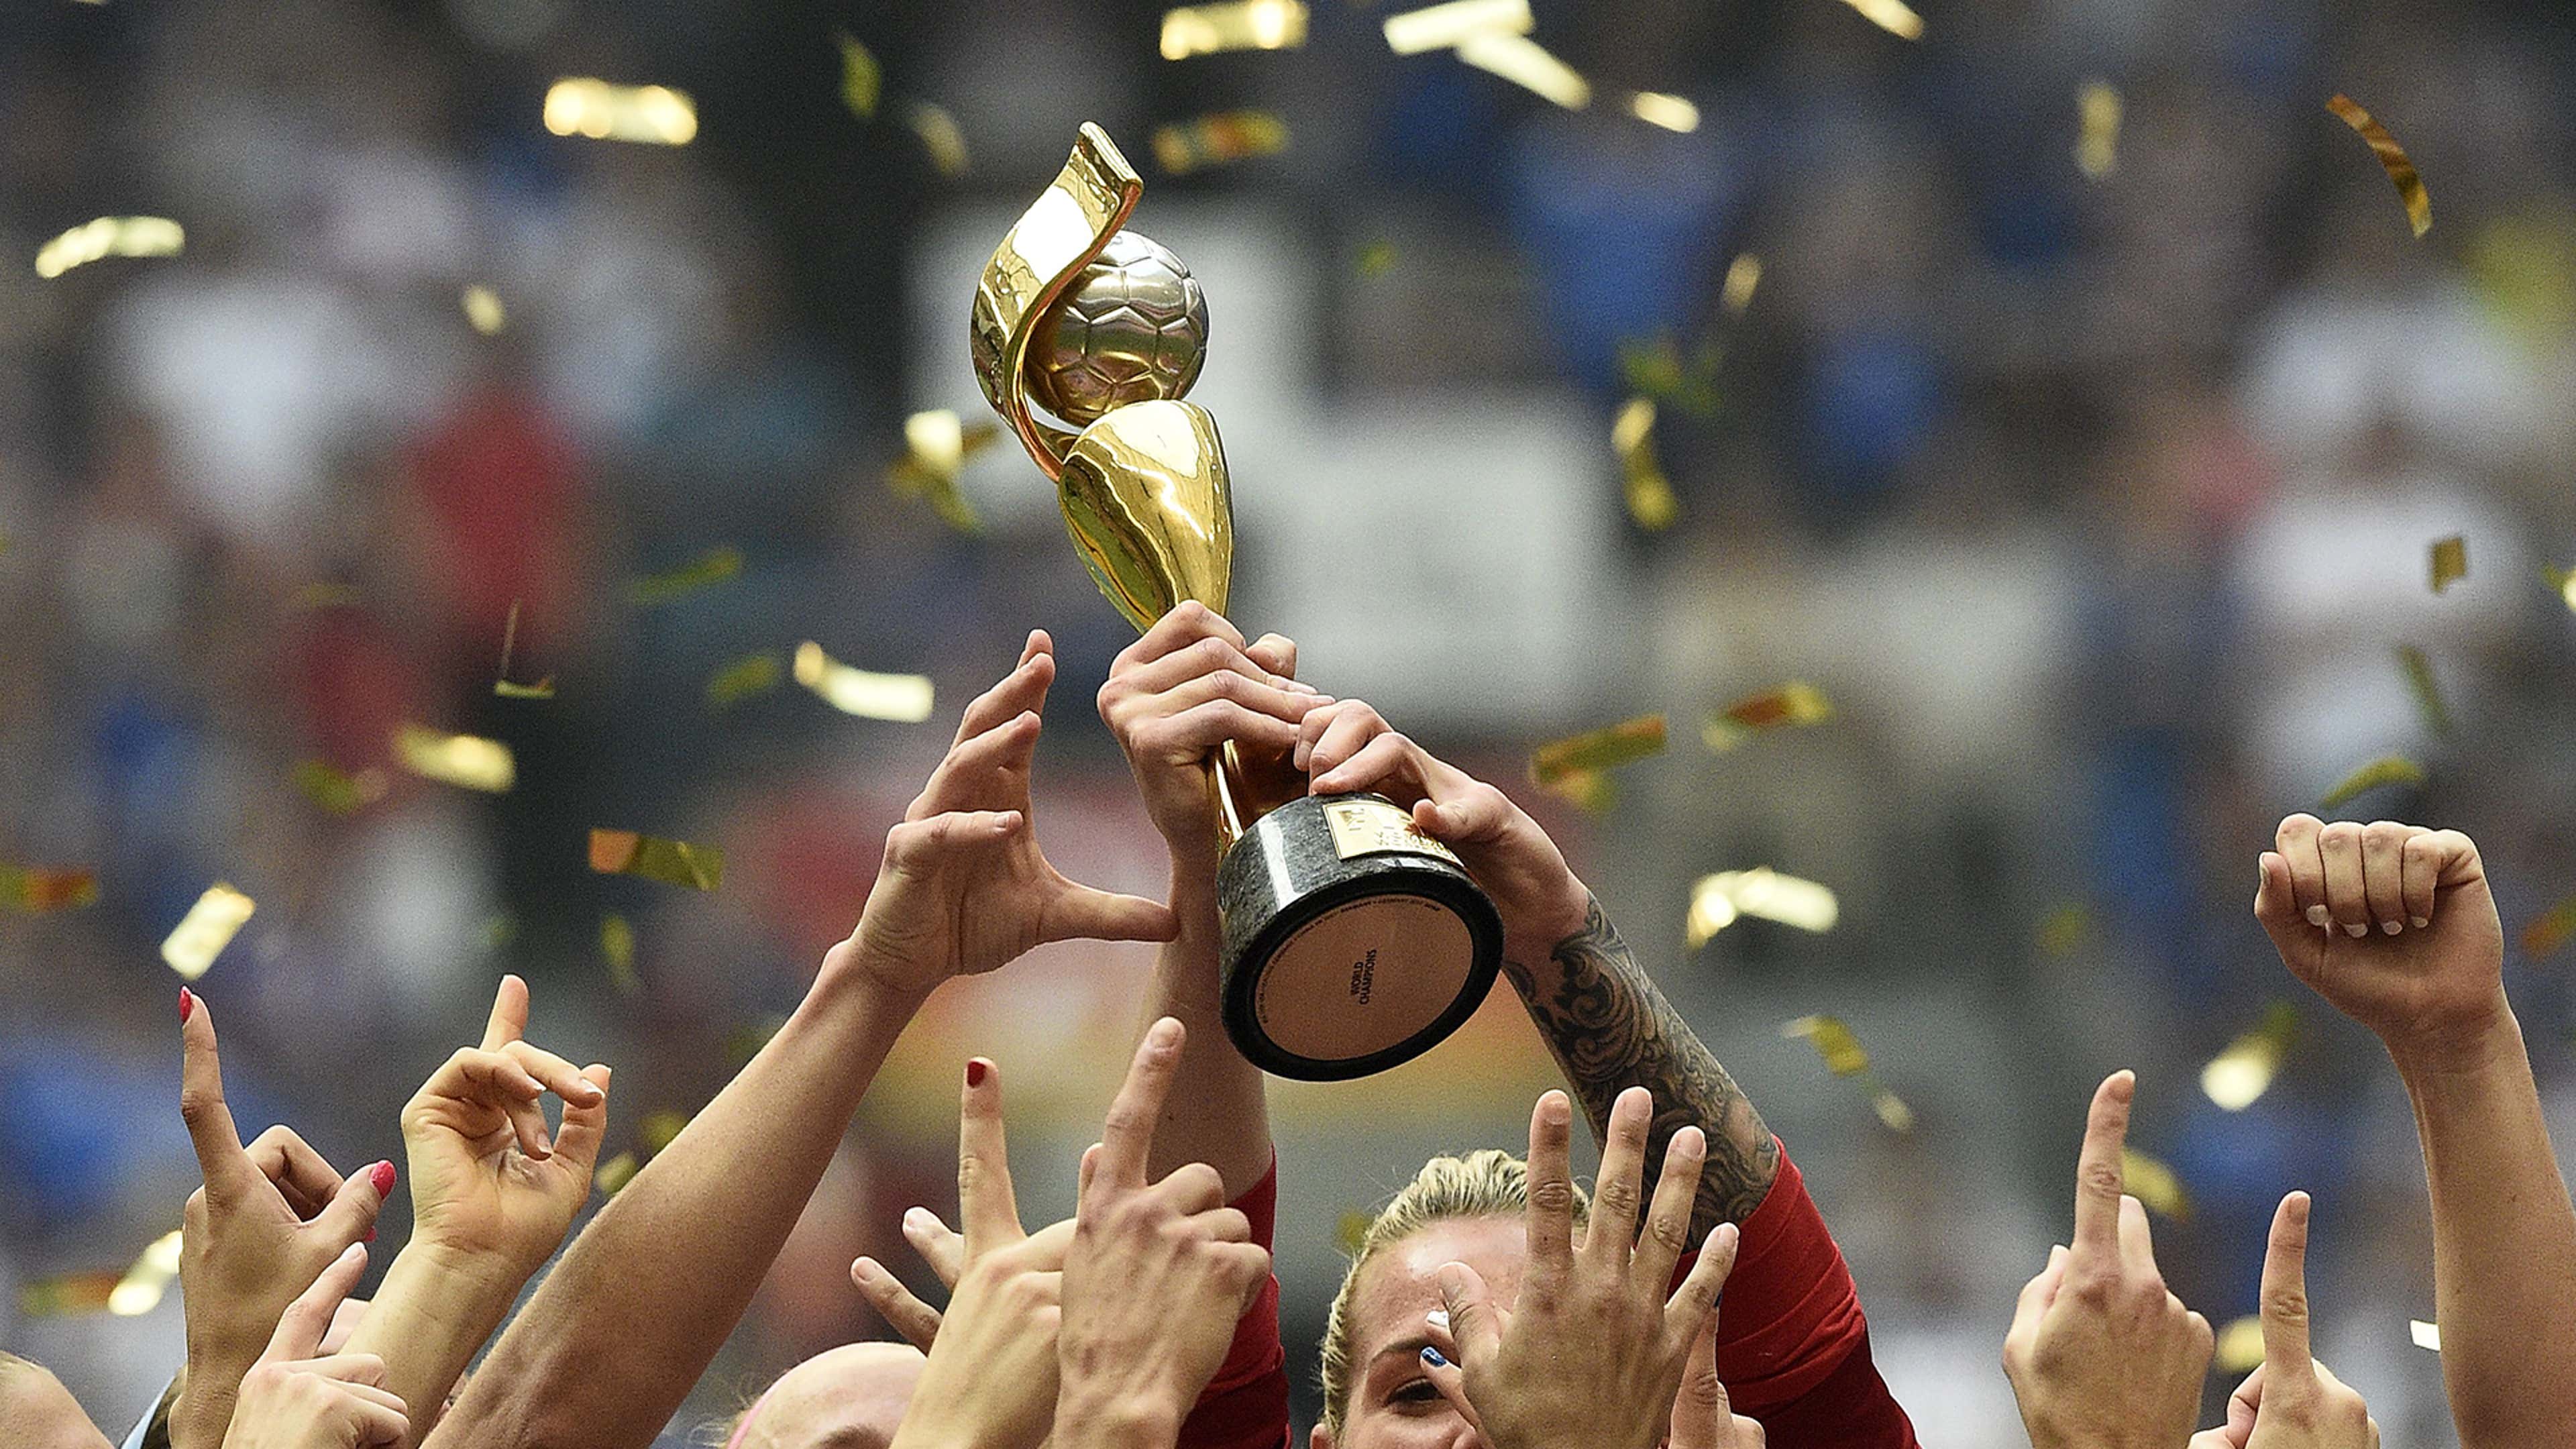 Women's World Cup trophy 2015 USWNT